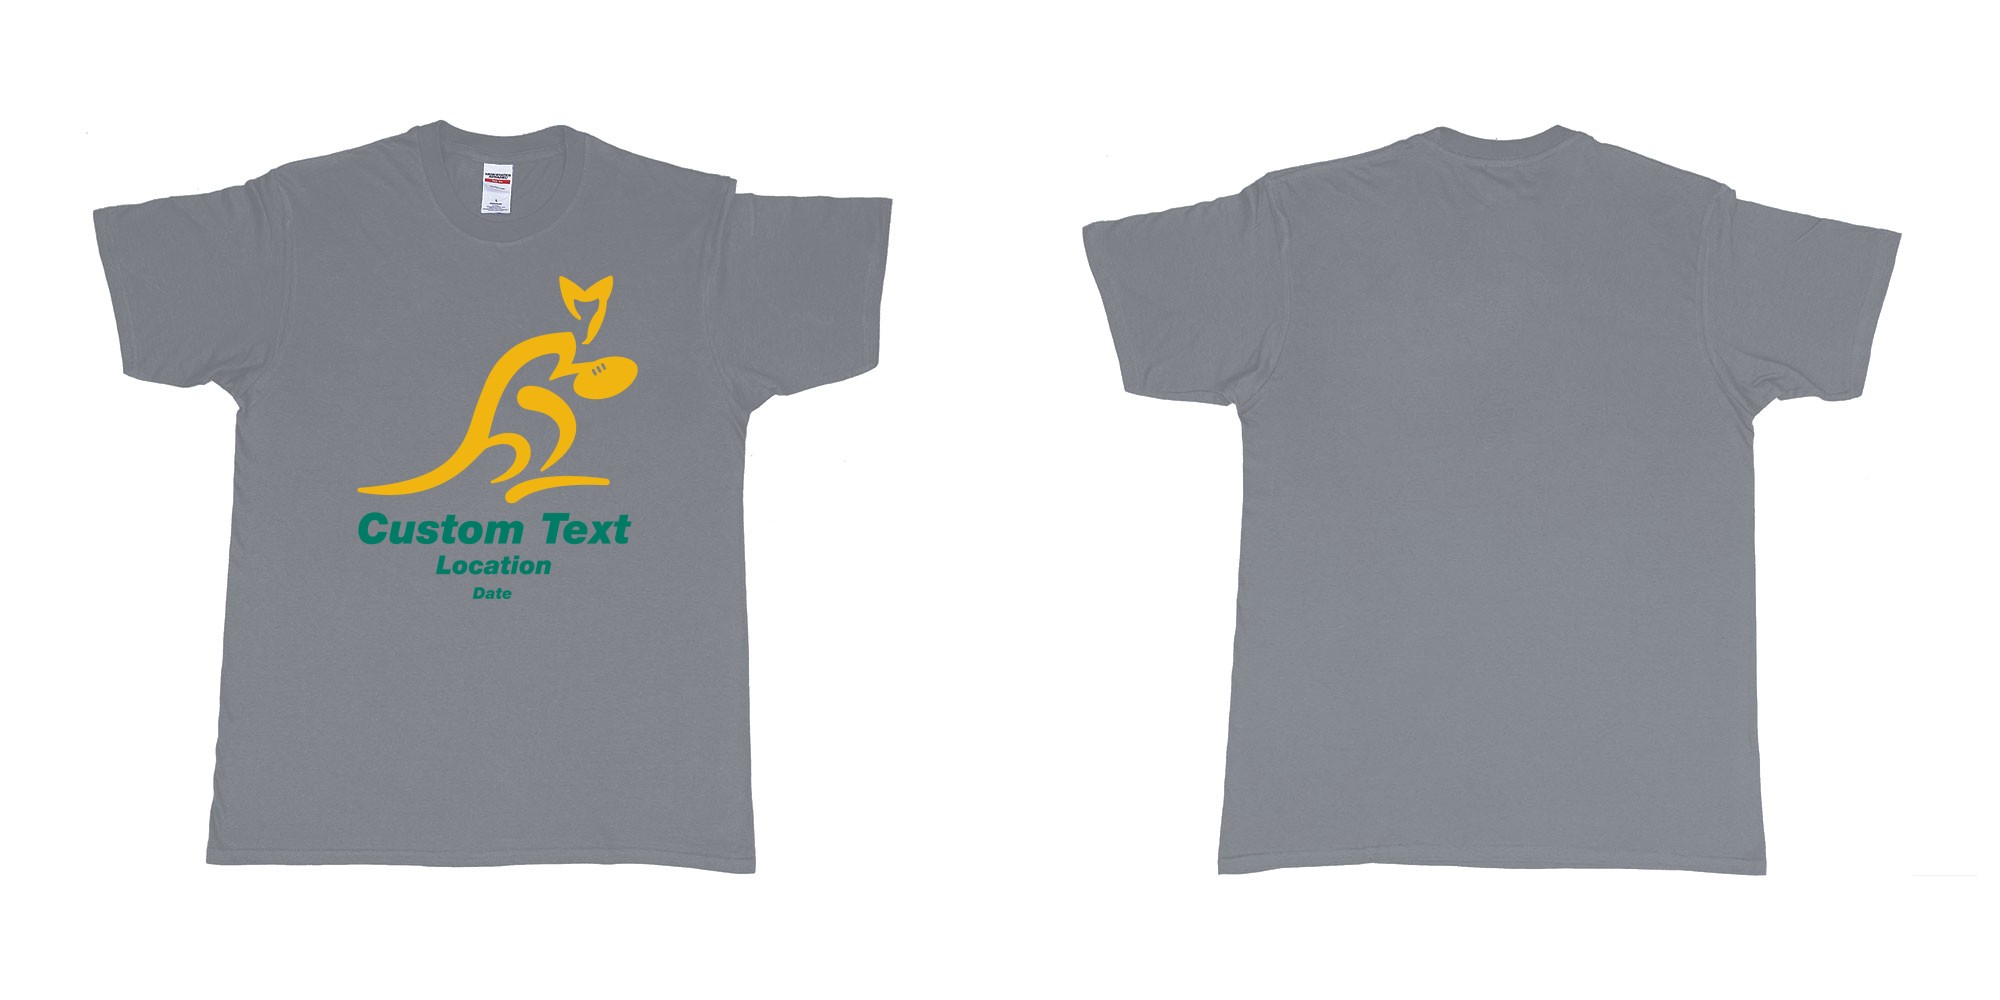 Custom tshirt design australia national rugby union team the wallabies in fabric color misty choice your own text made in Bali by The Pirate Way